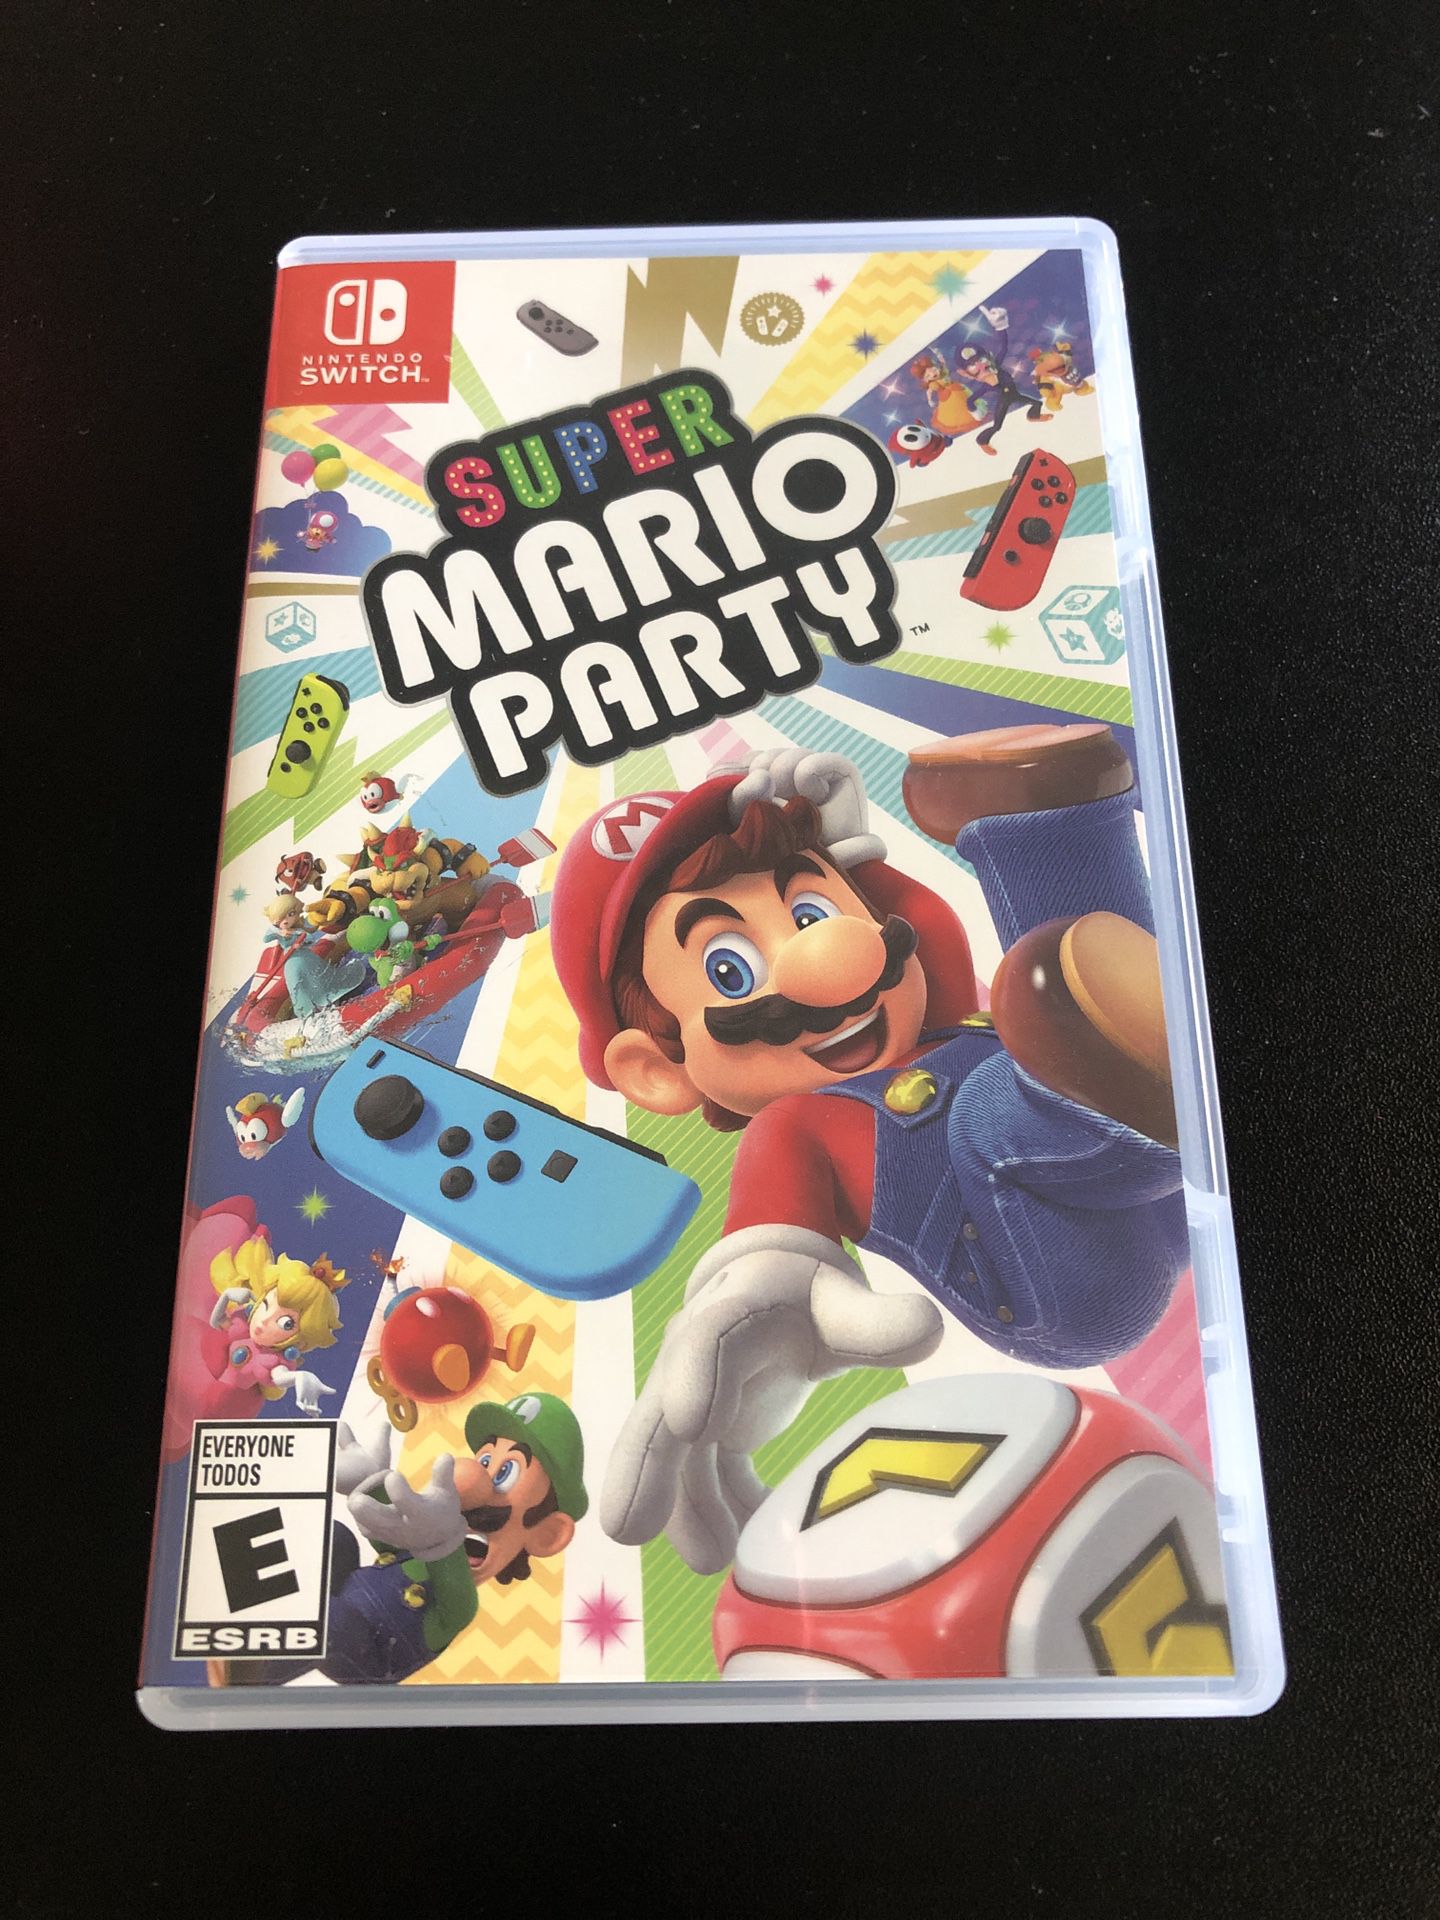 Super Mario party for Nintendo switch